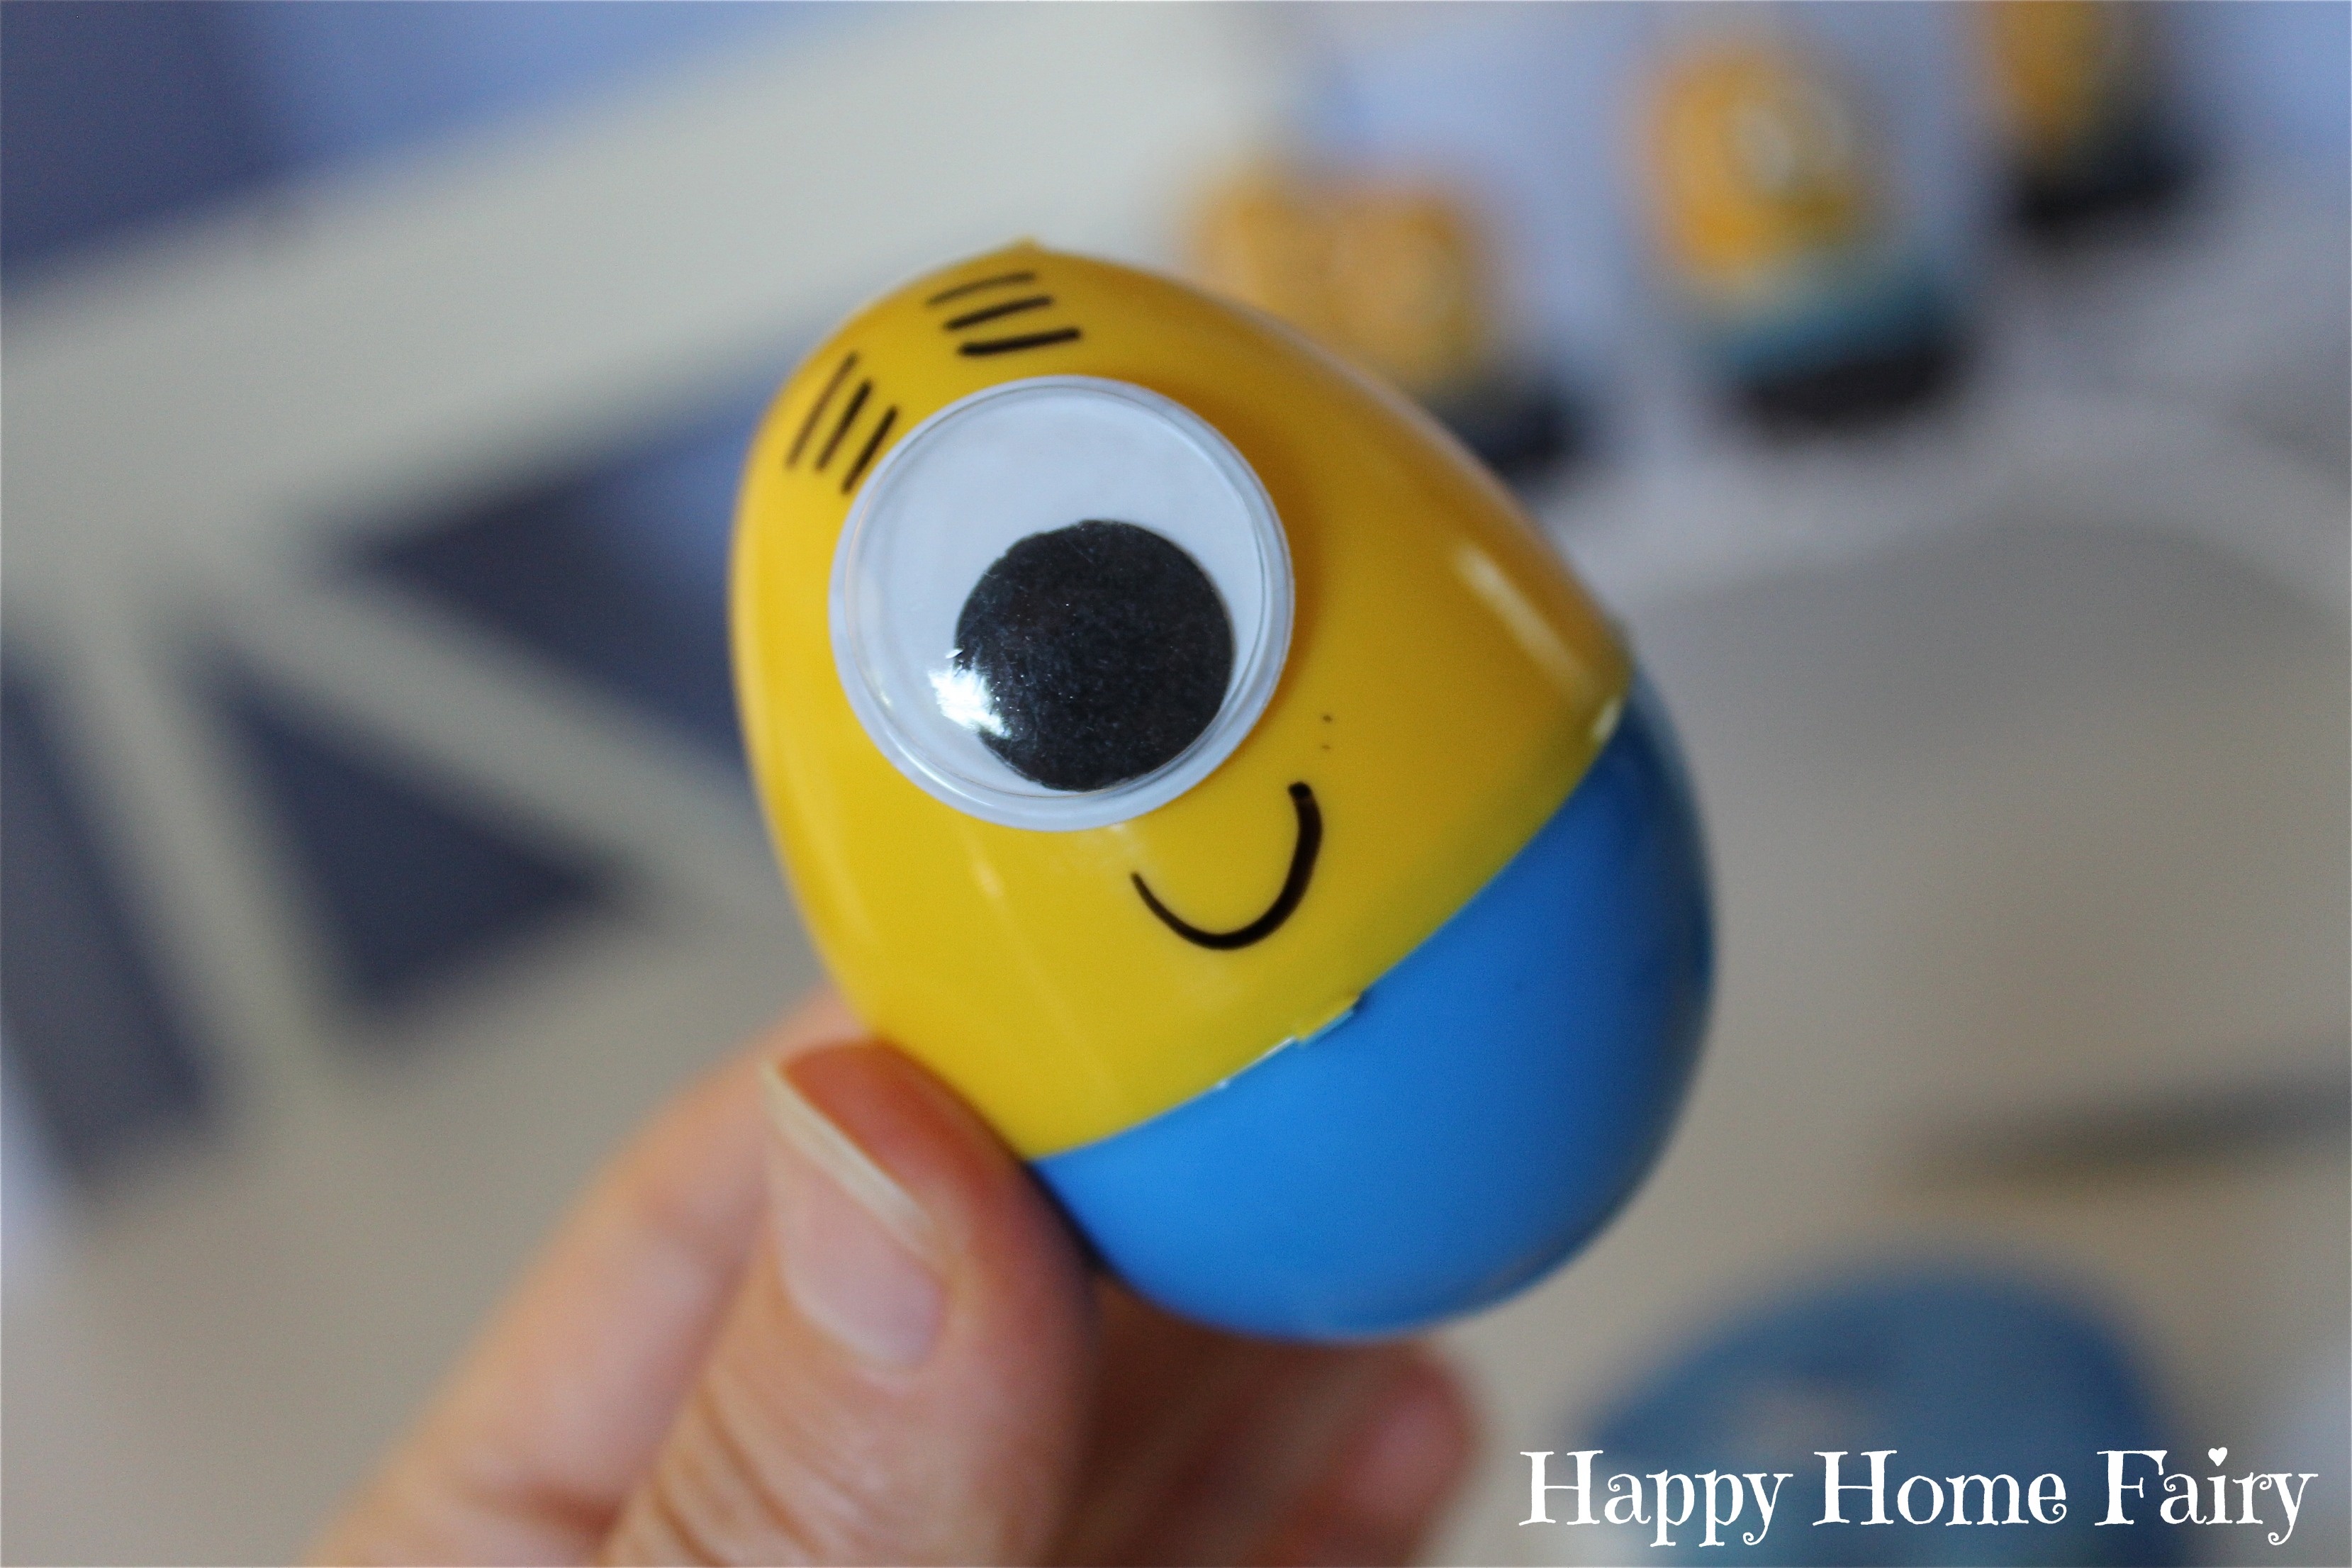 How To Make Minion Easter Eggs - Happy Home Fairy3318 x 2212